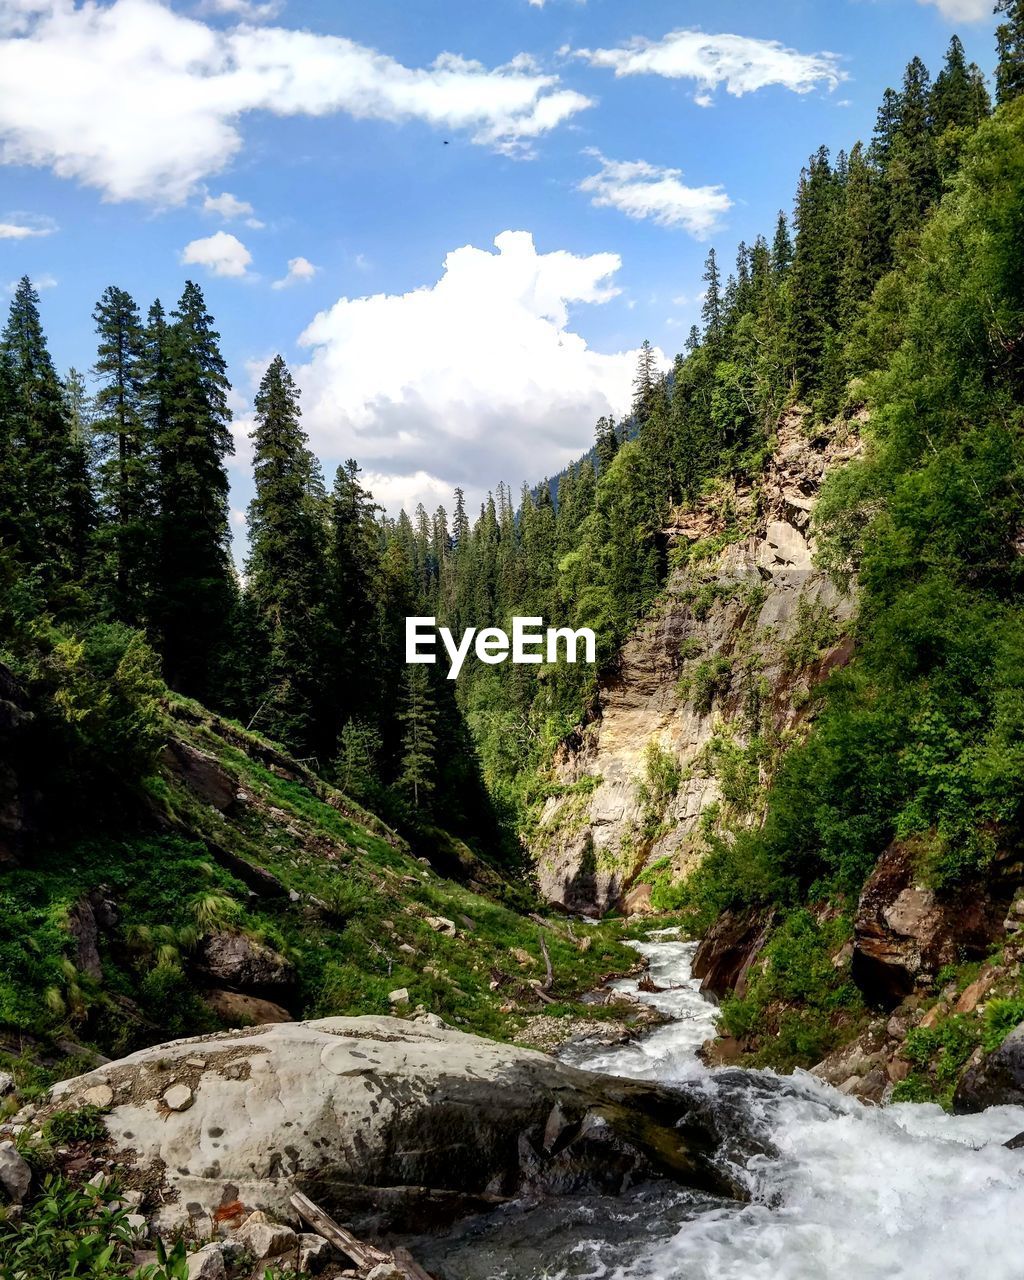 SCENIC VIEW OF WATERFALL BY TREES AGAINST SKY